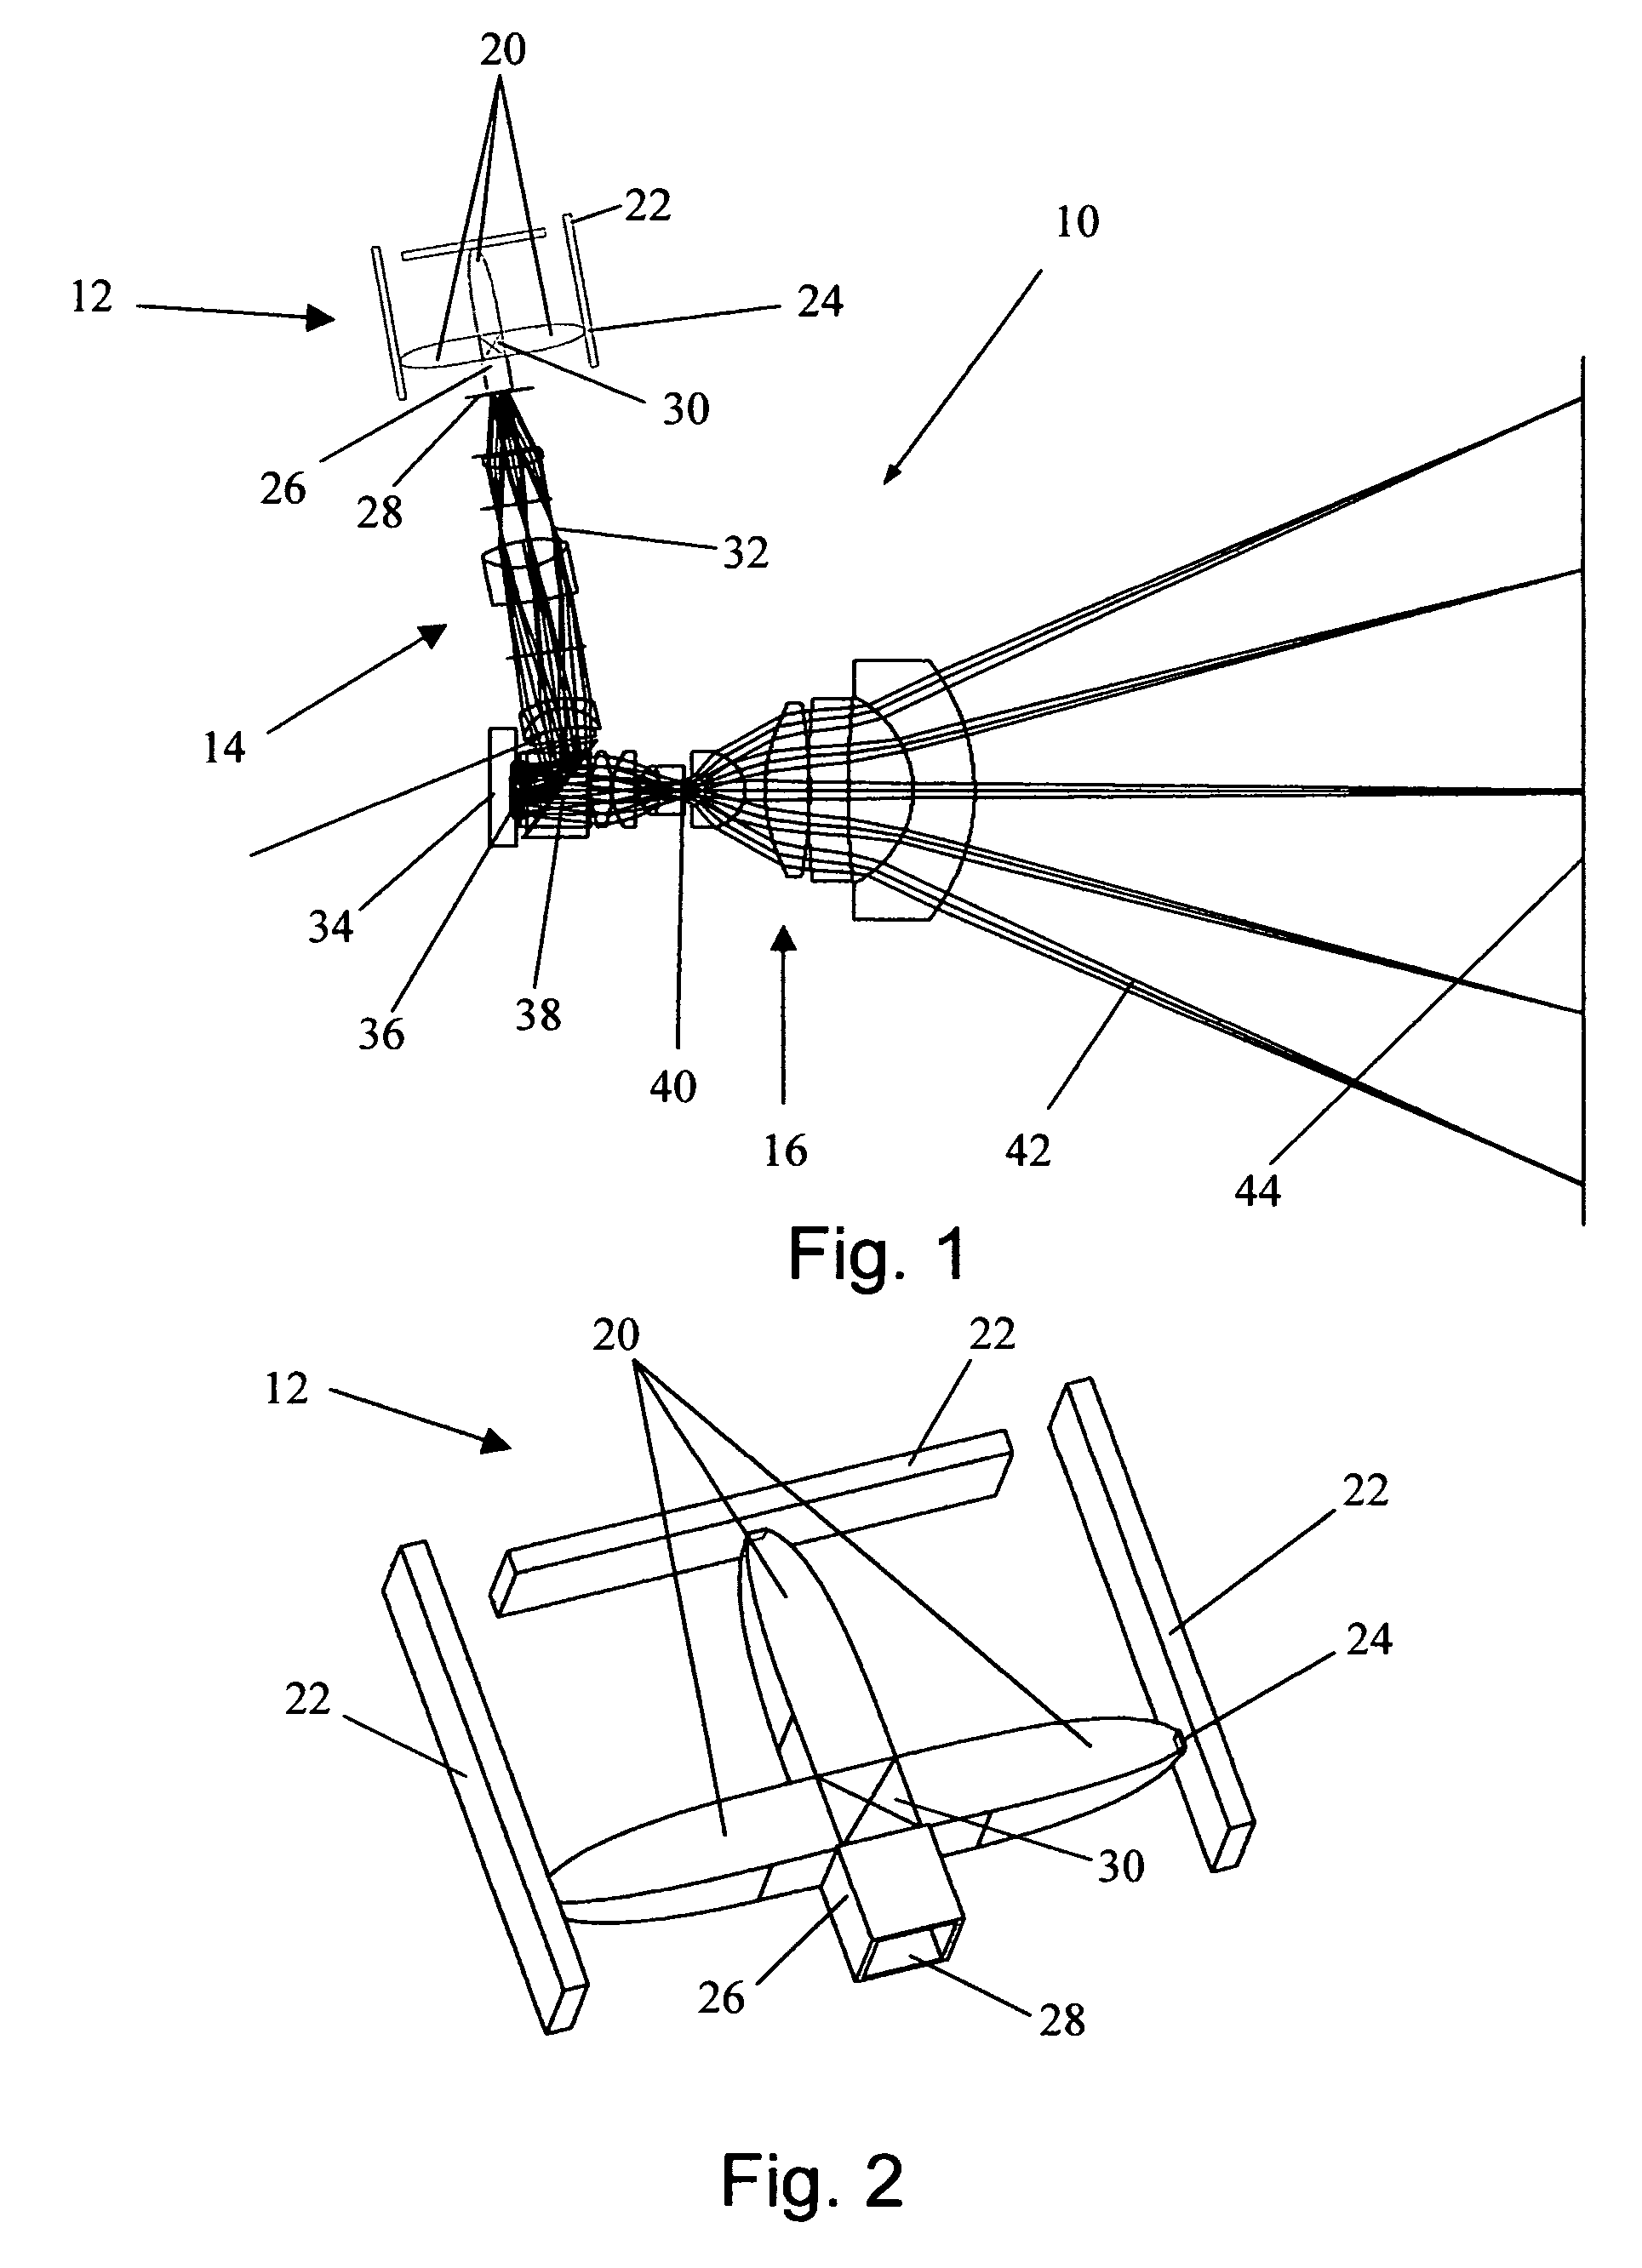 Light emitting diode projection system